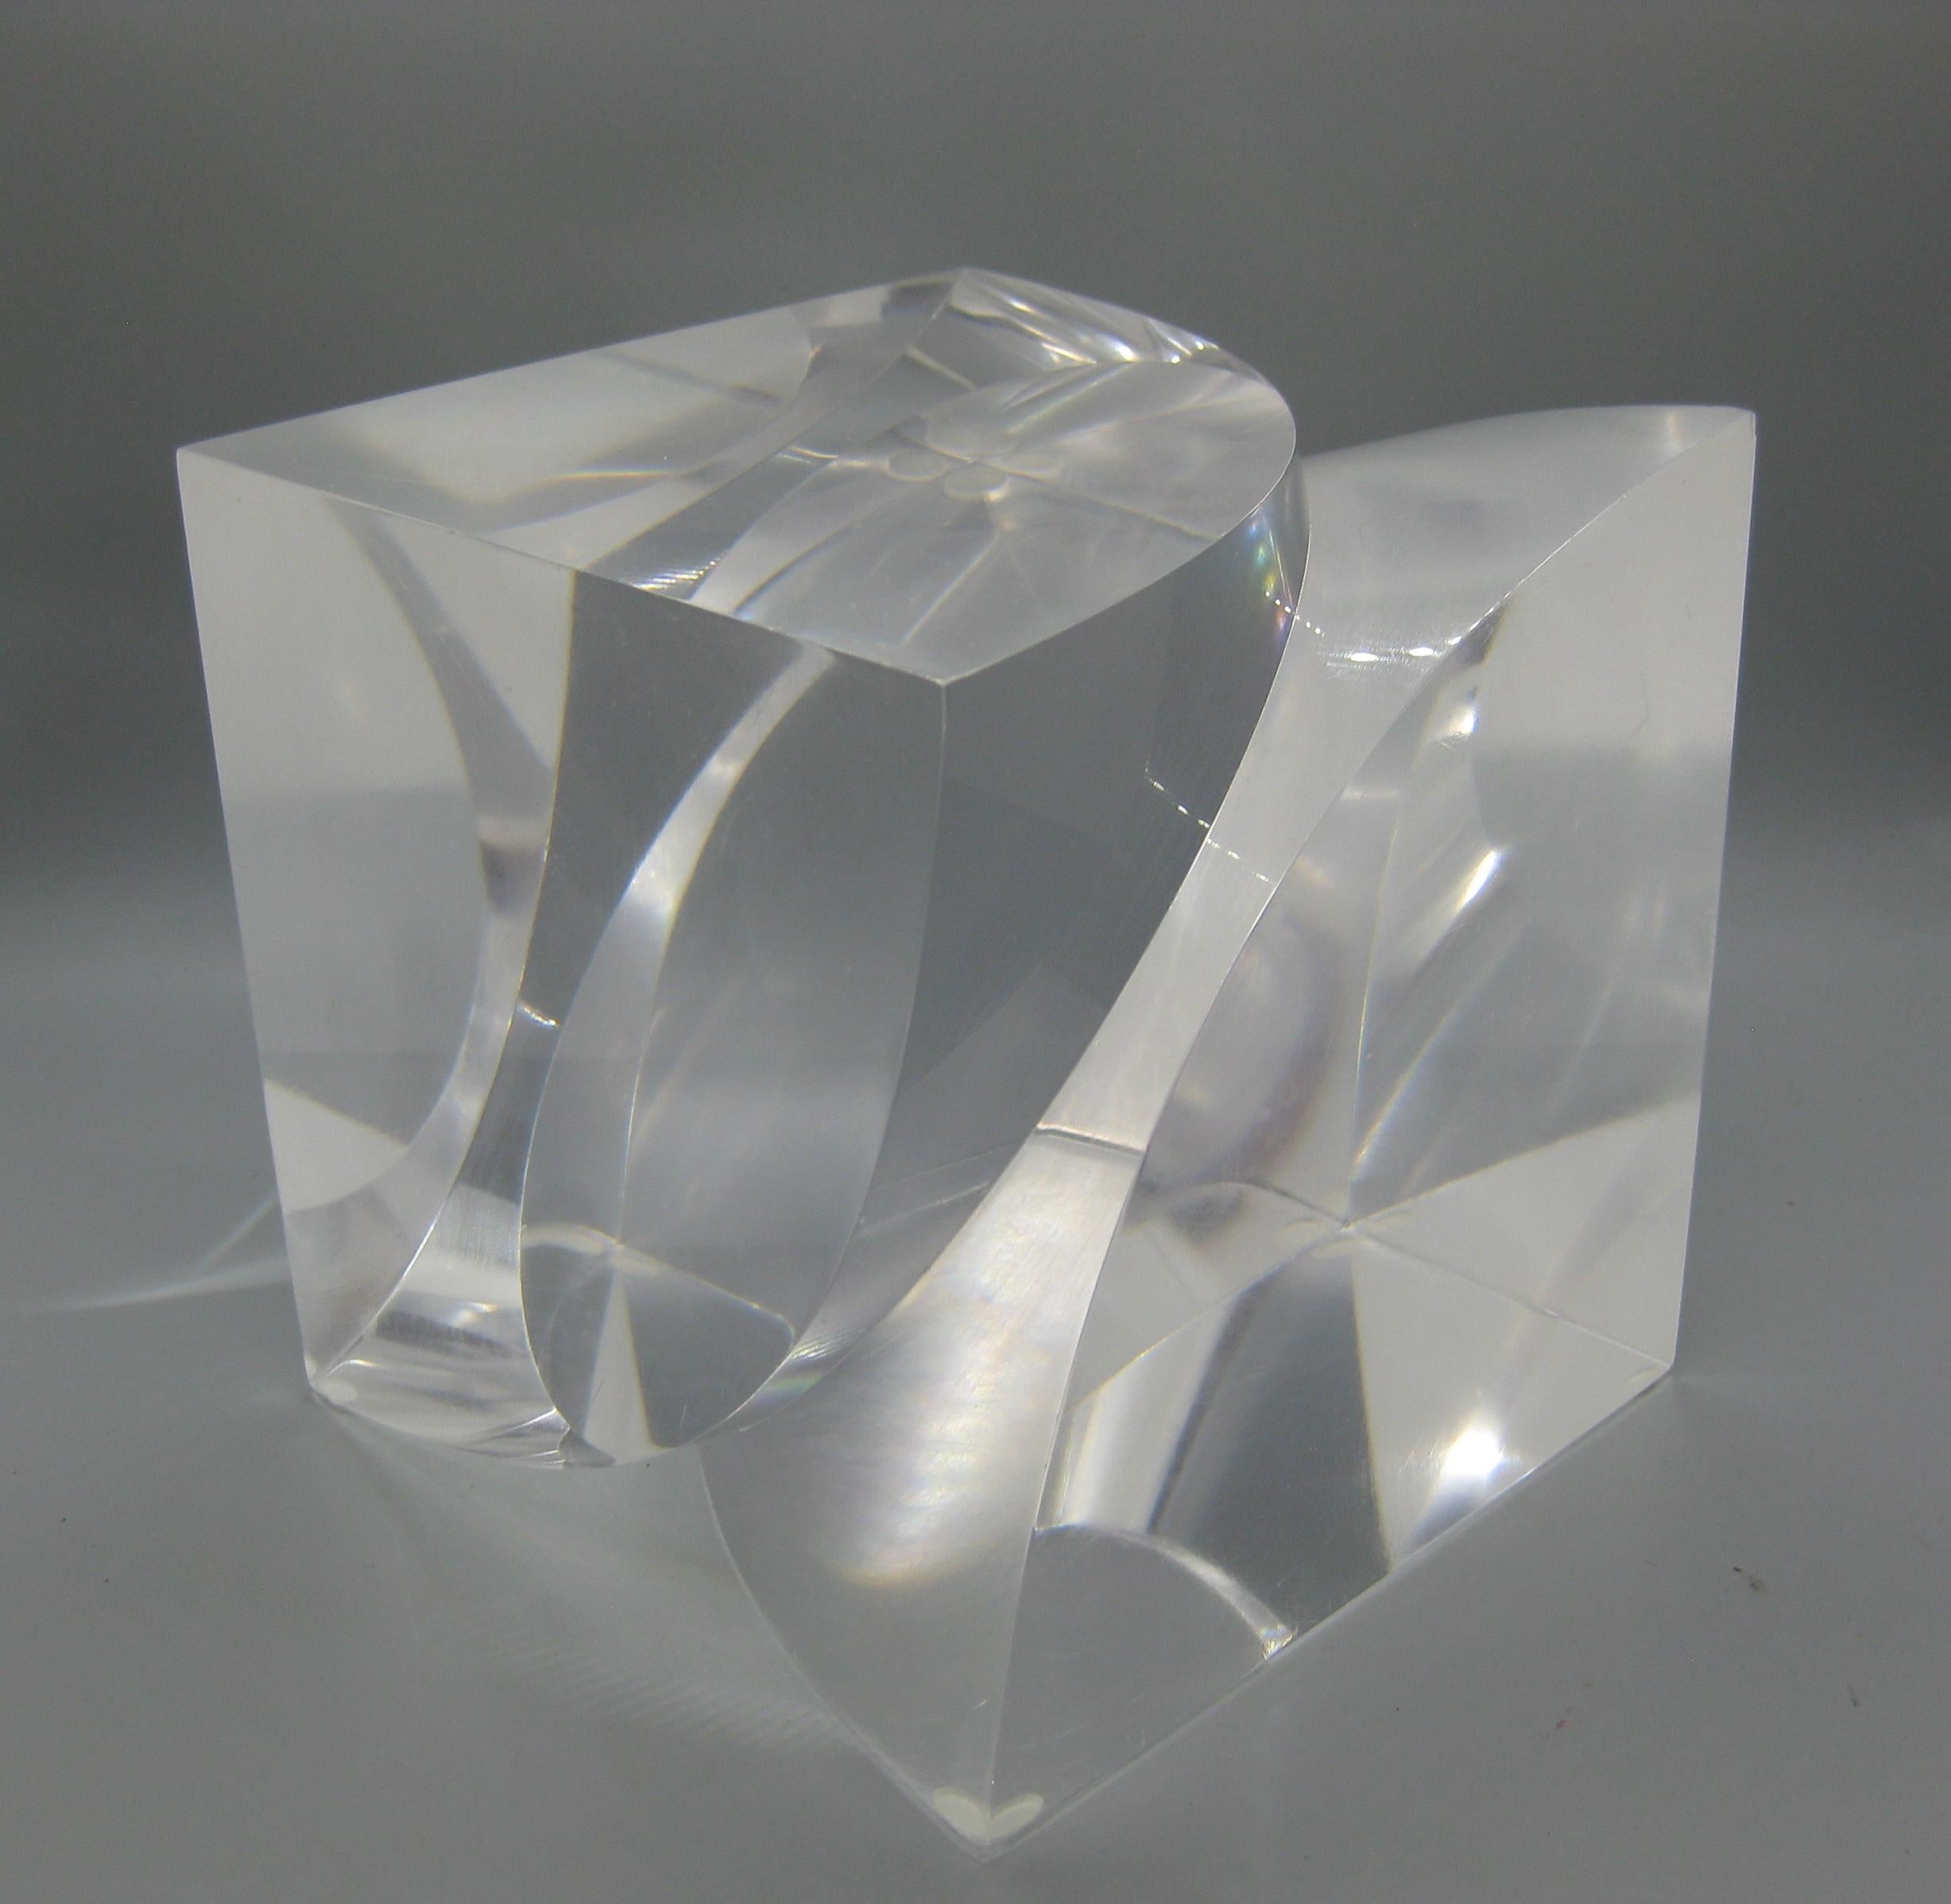 1960's-1970's Lucite Acrylic Optical Op-Art Large Cube Abstract Sculpture In Good Condition For Sale In San Diego, CA